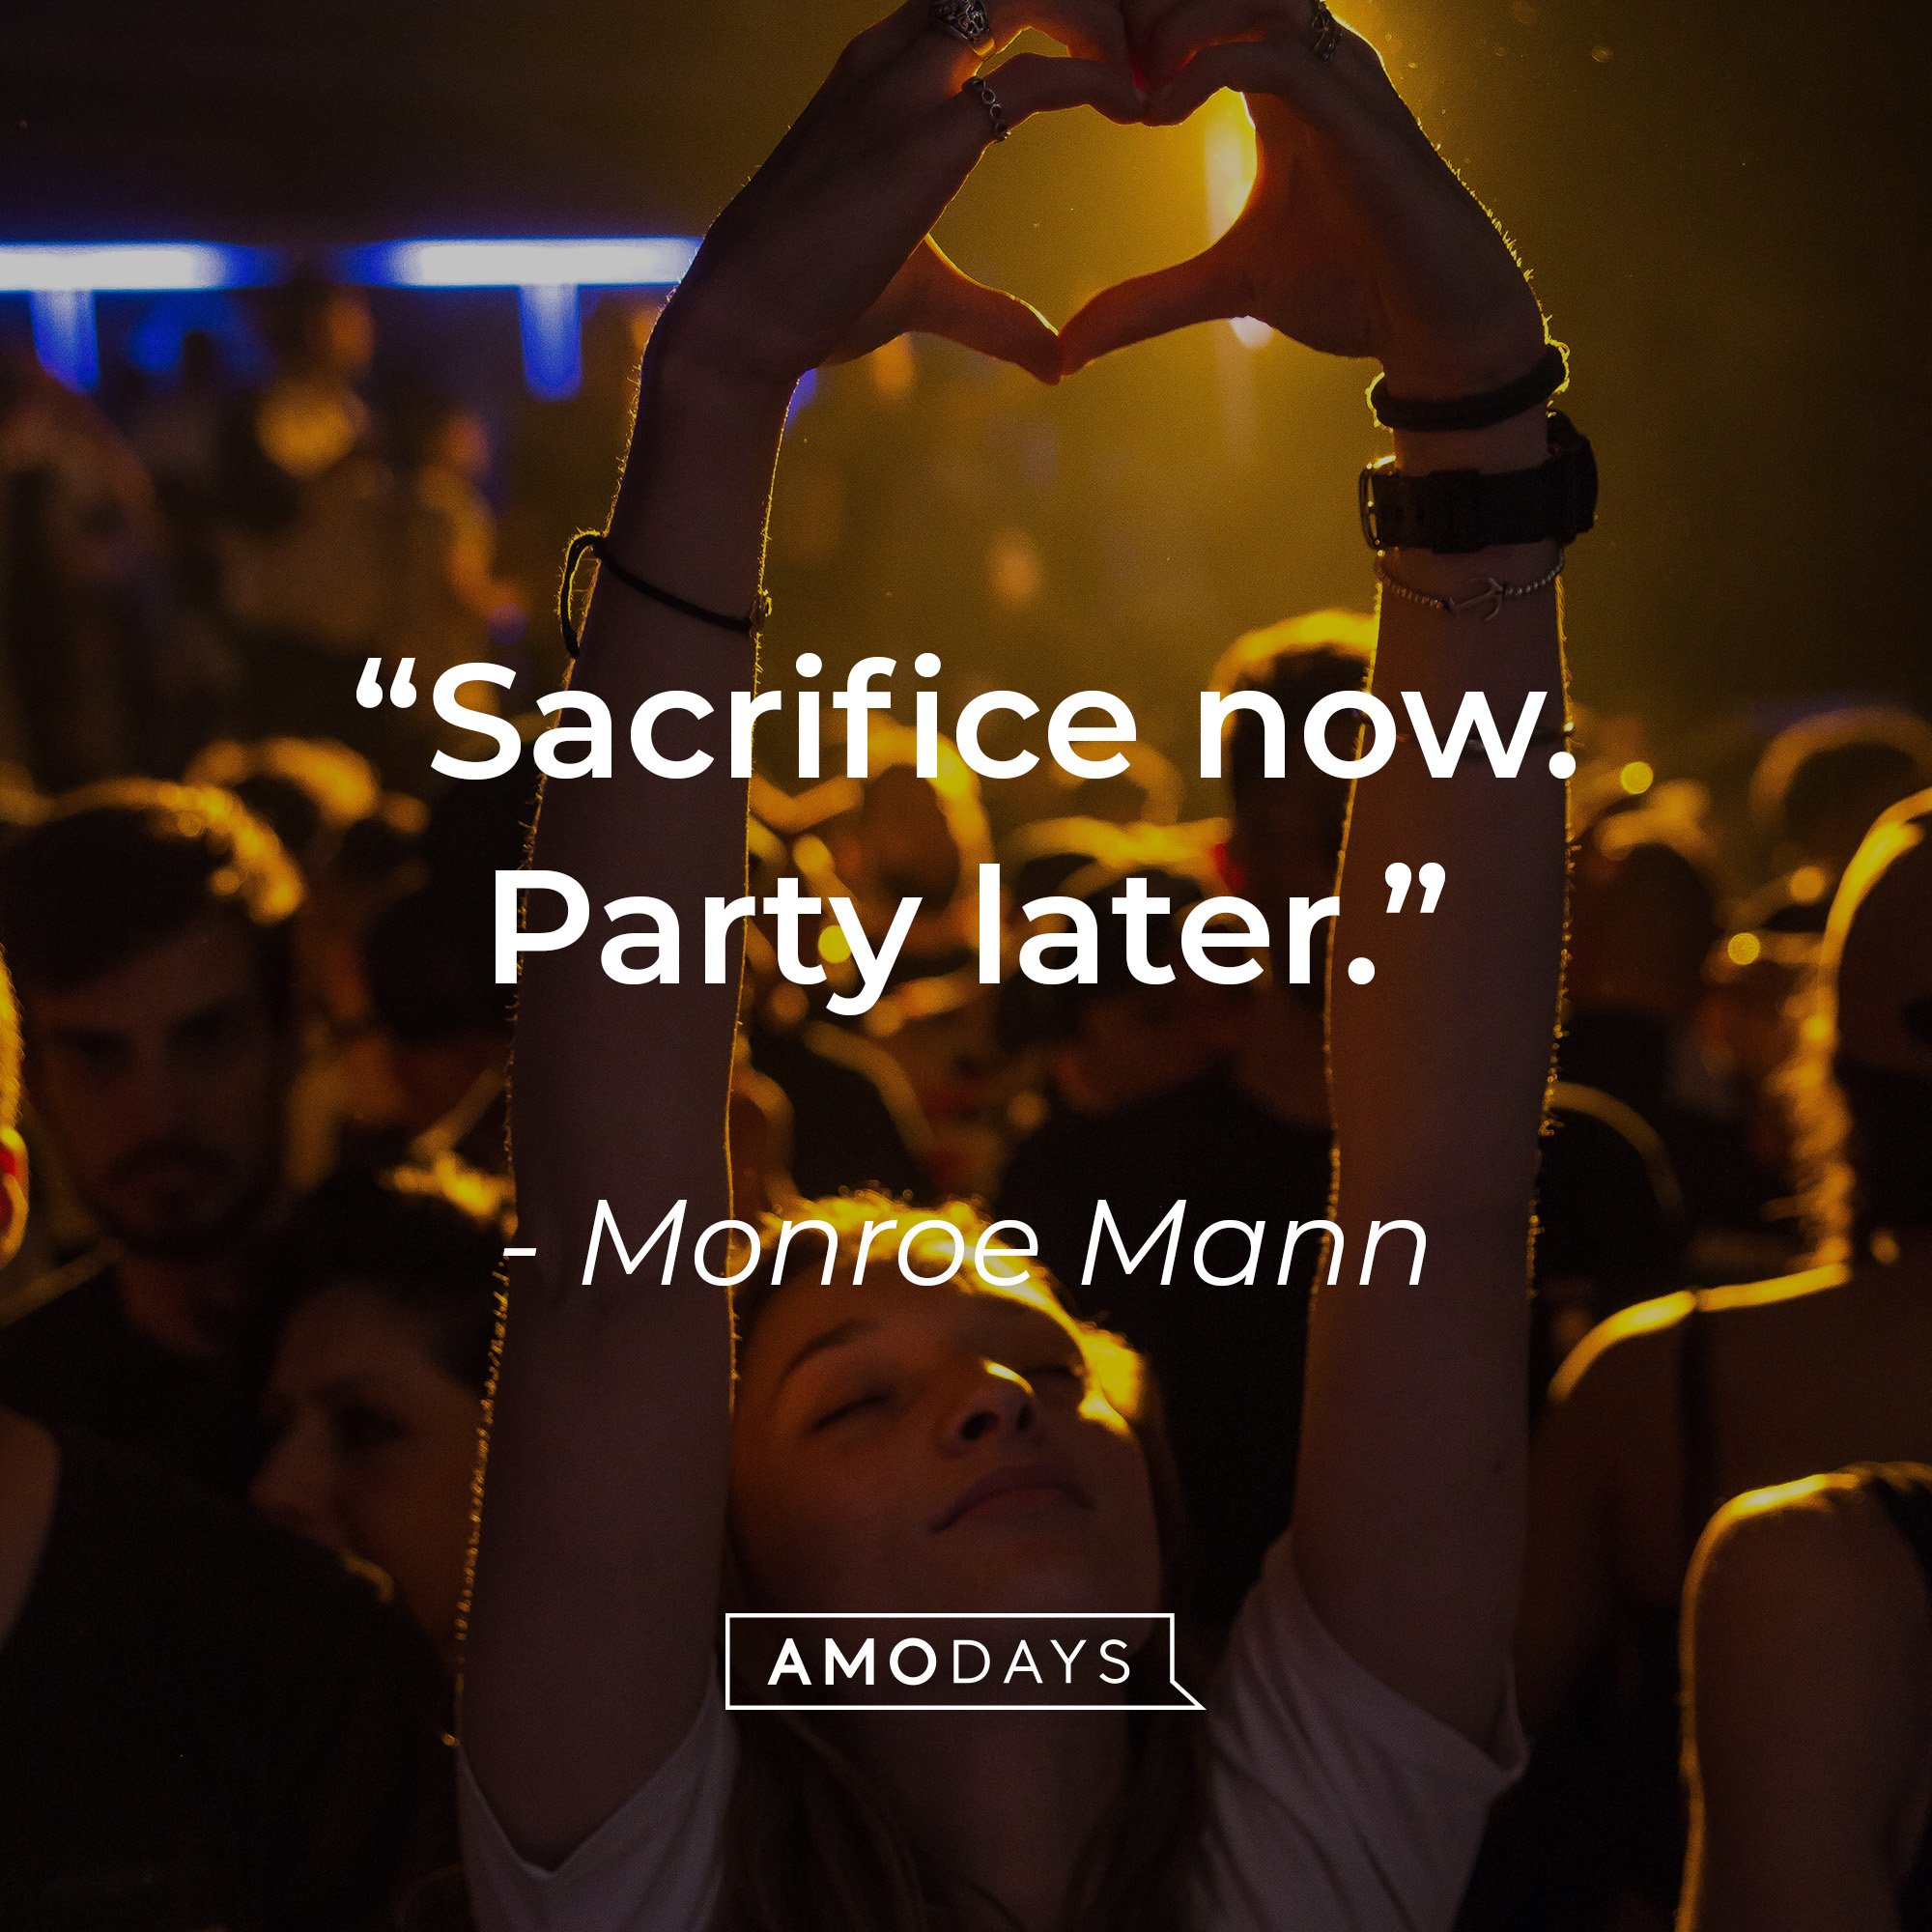 Monroe Mann's quote: "Sacrifice now. Party later." | Image: AmoDays 